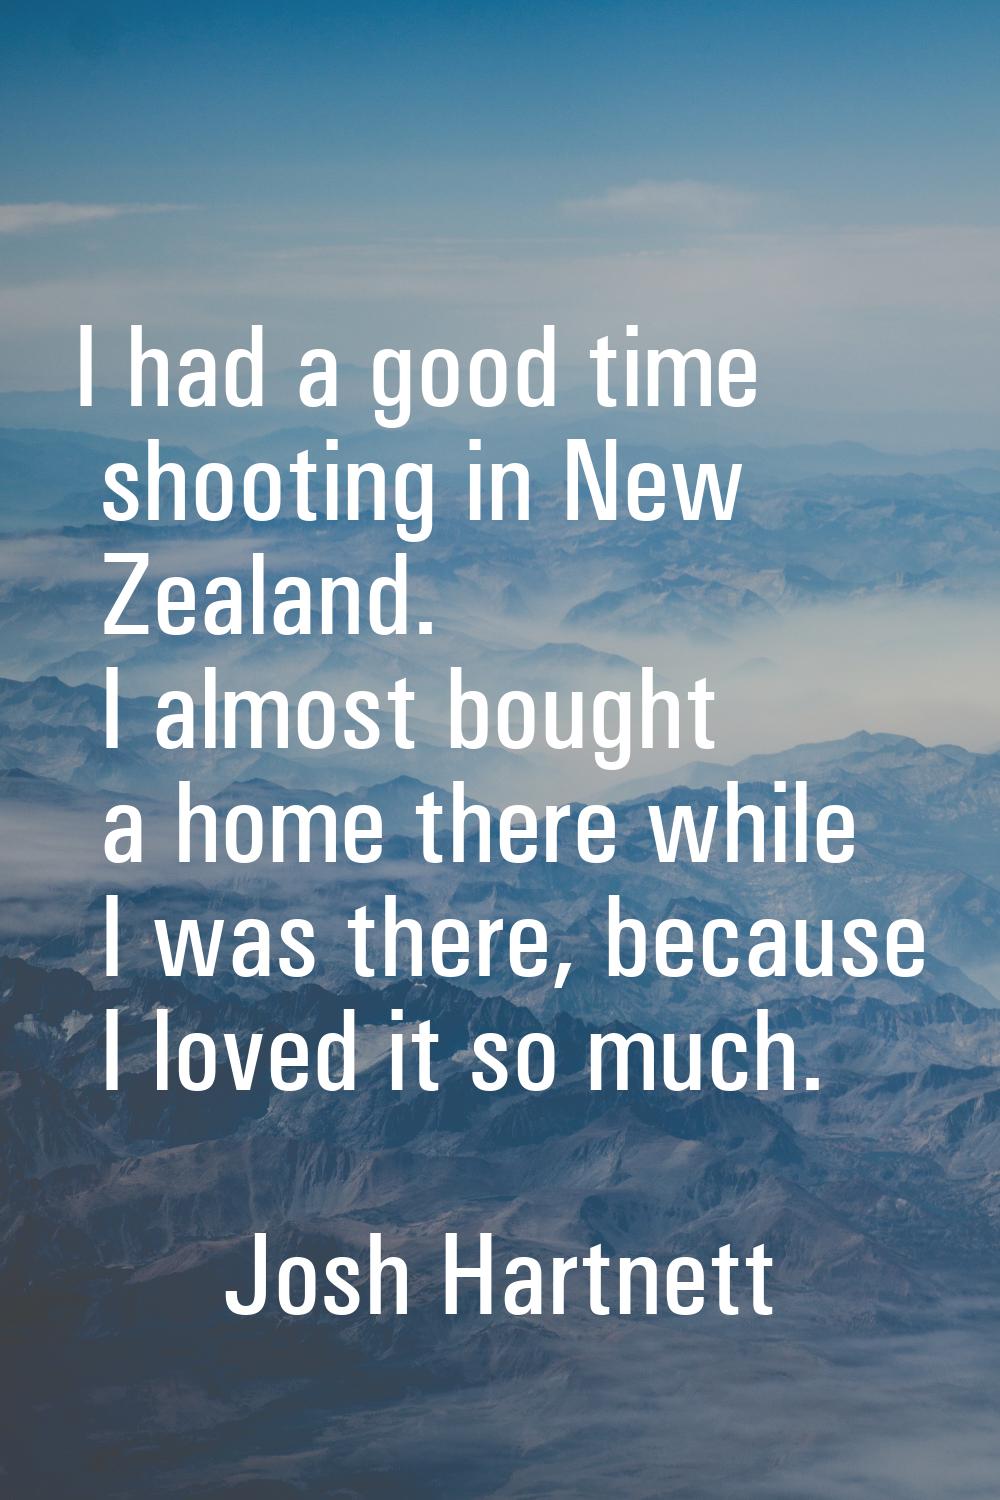 I had a good time shooting in New Zealand. I almost bought a home there while I was there, because 